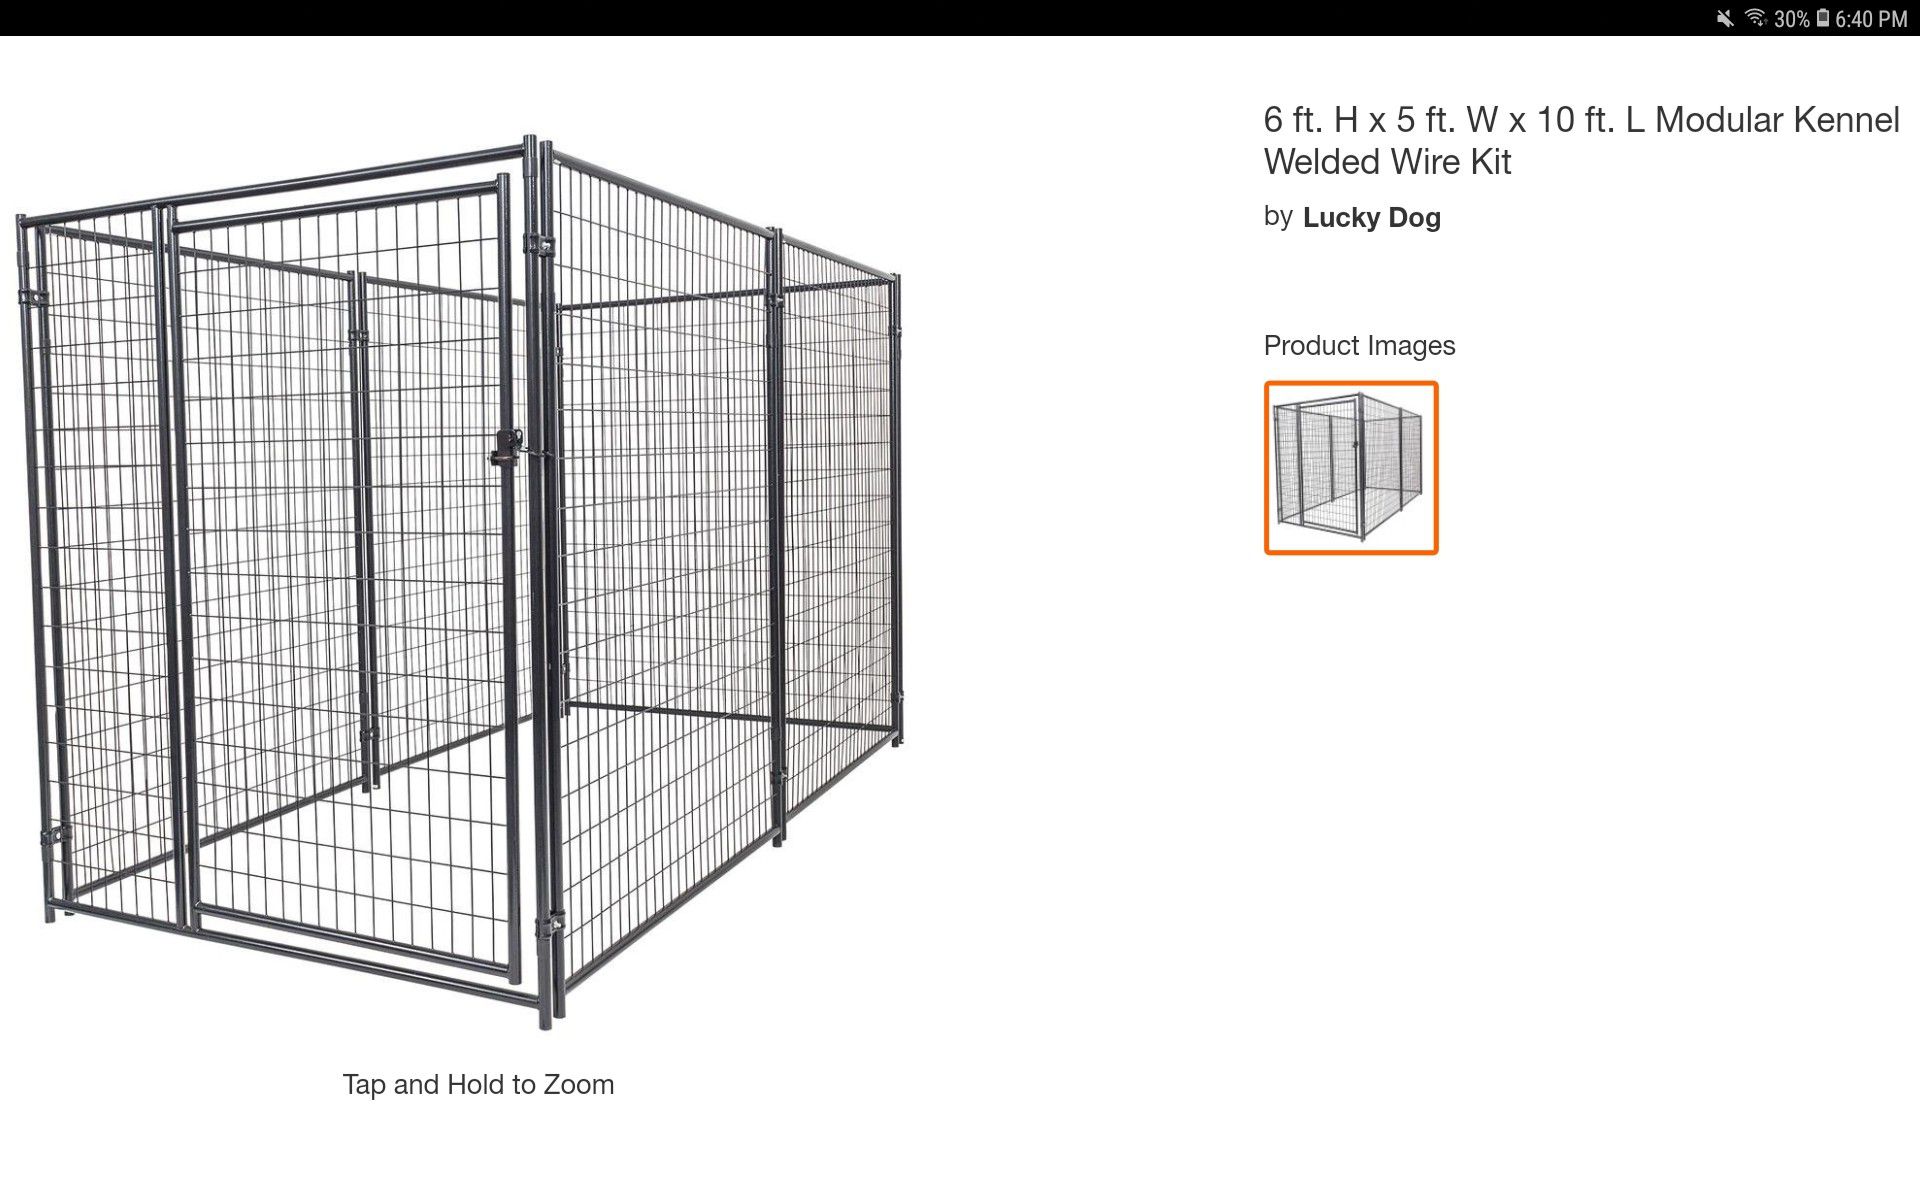 Welded wire kennel cage